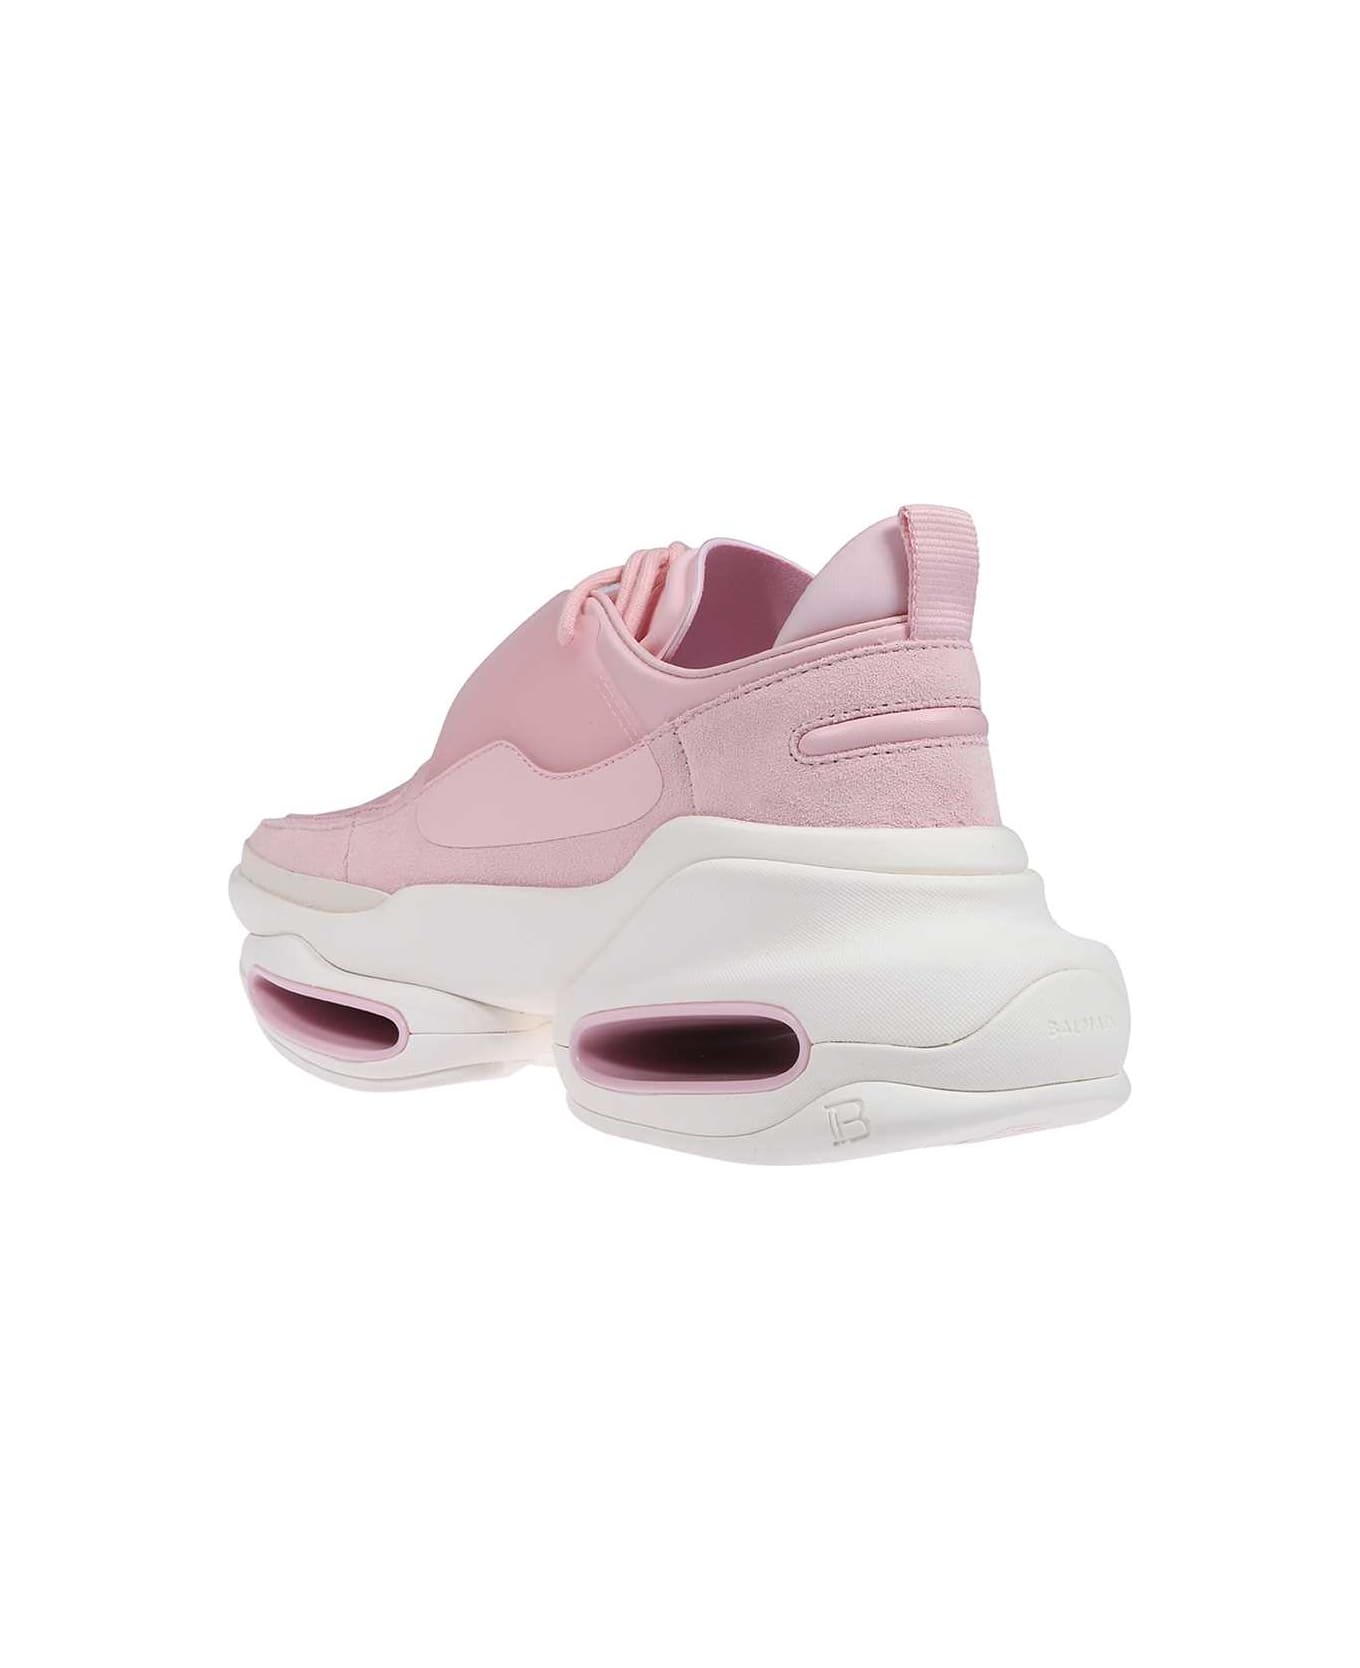 Balmain Leather Mid-top Sneakers - Pink